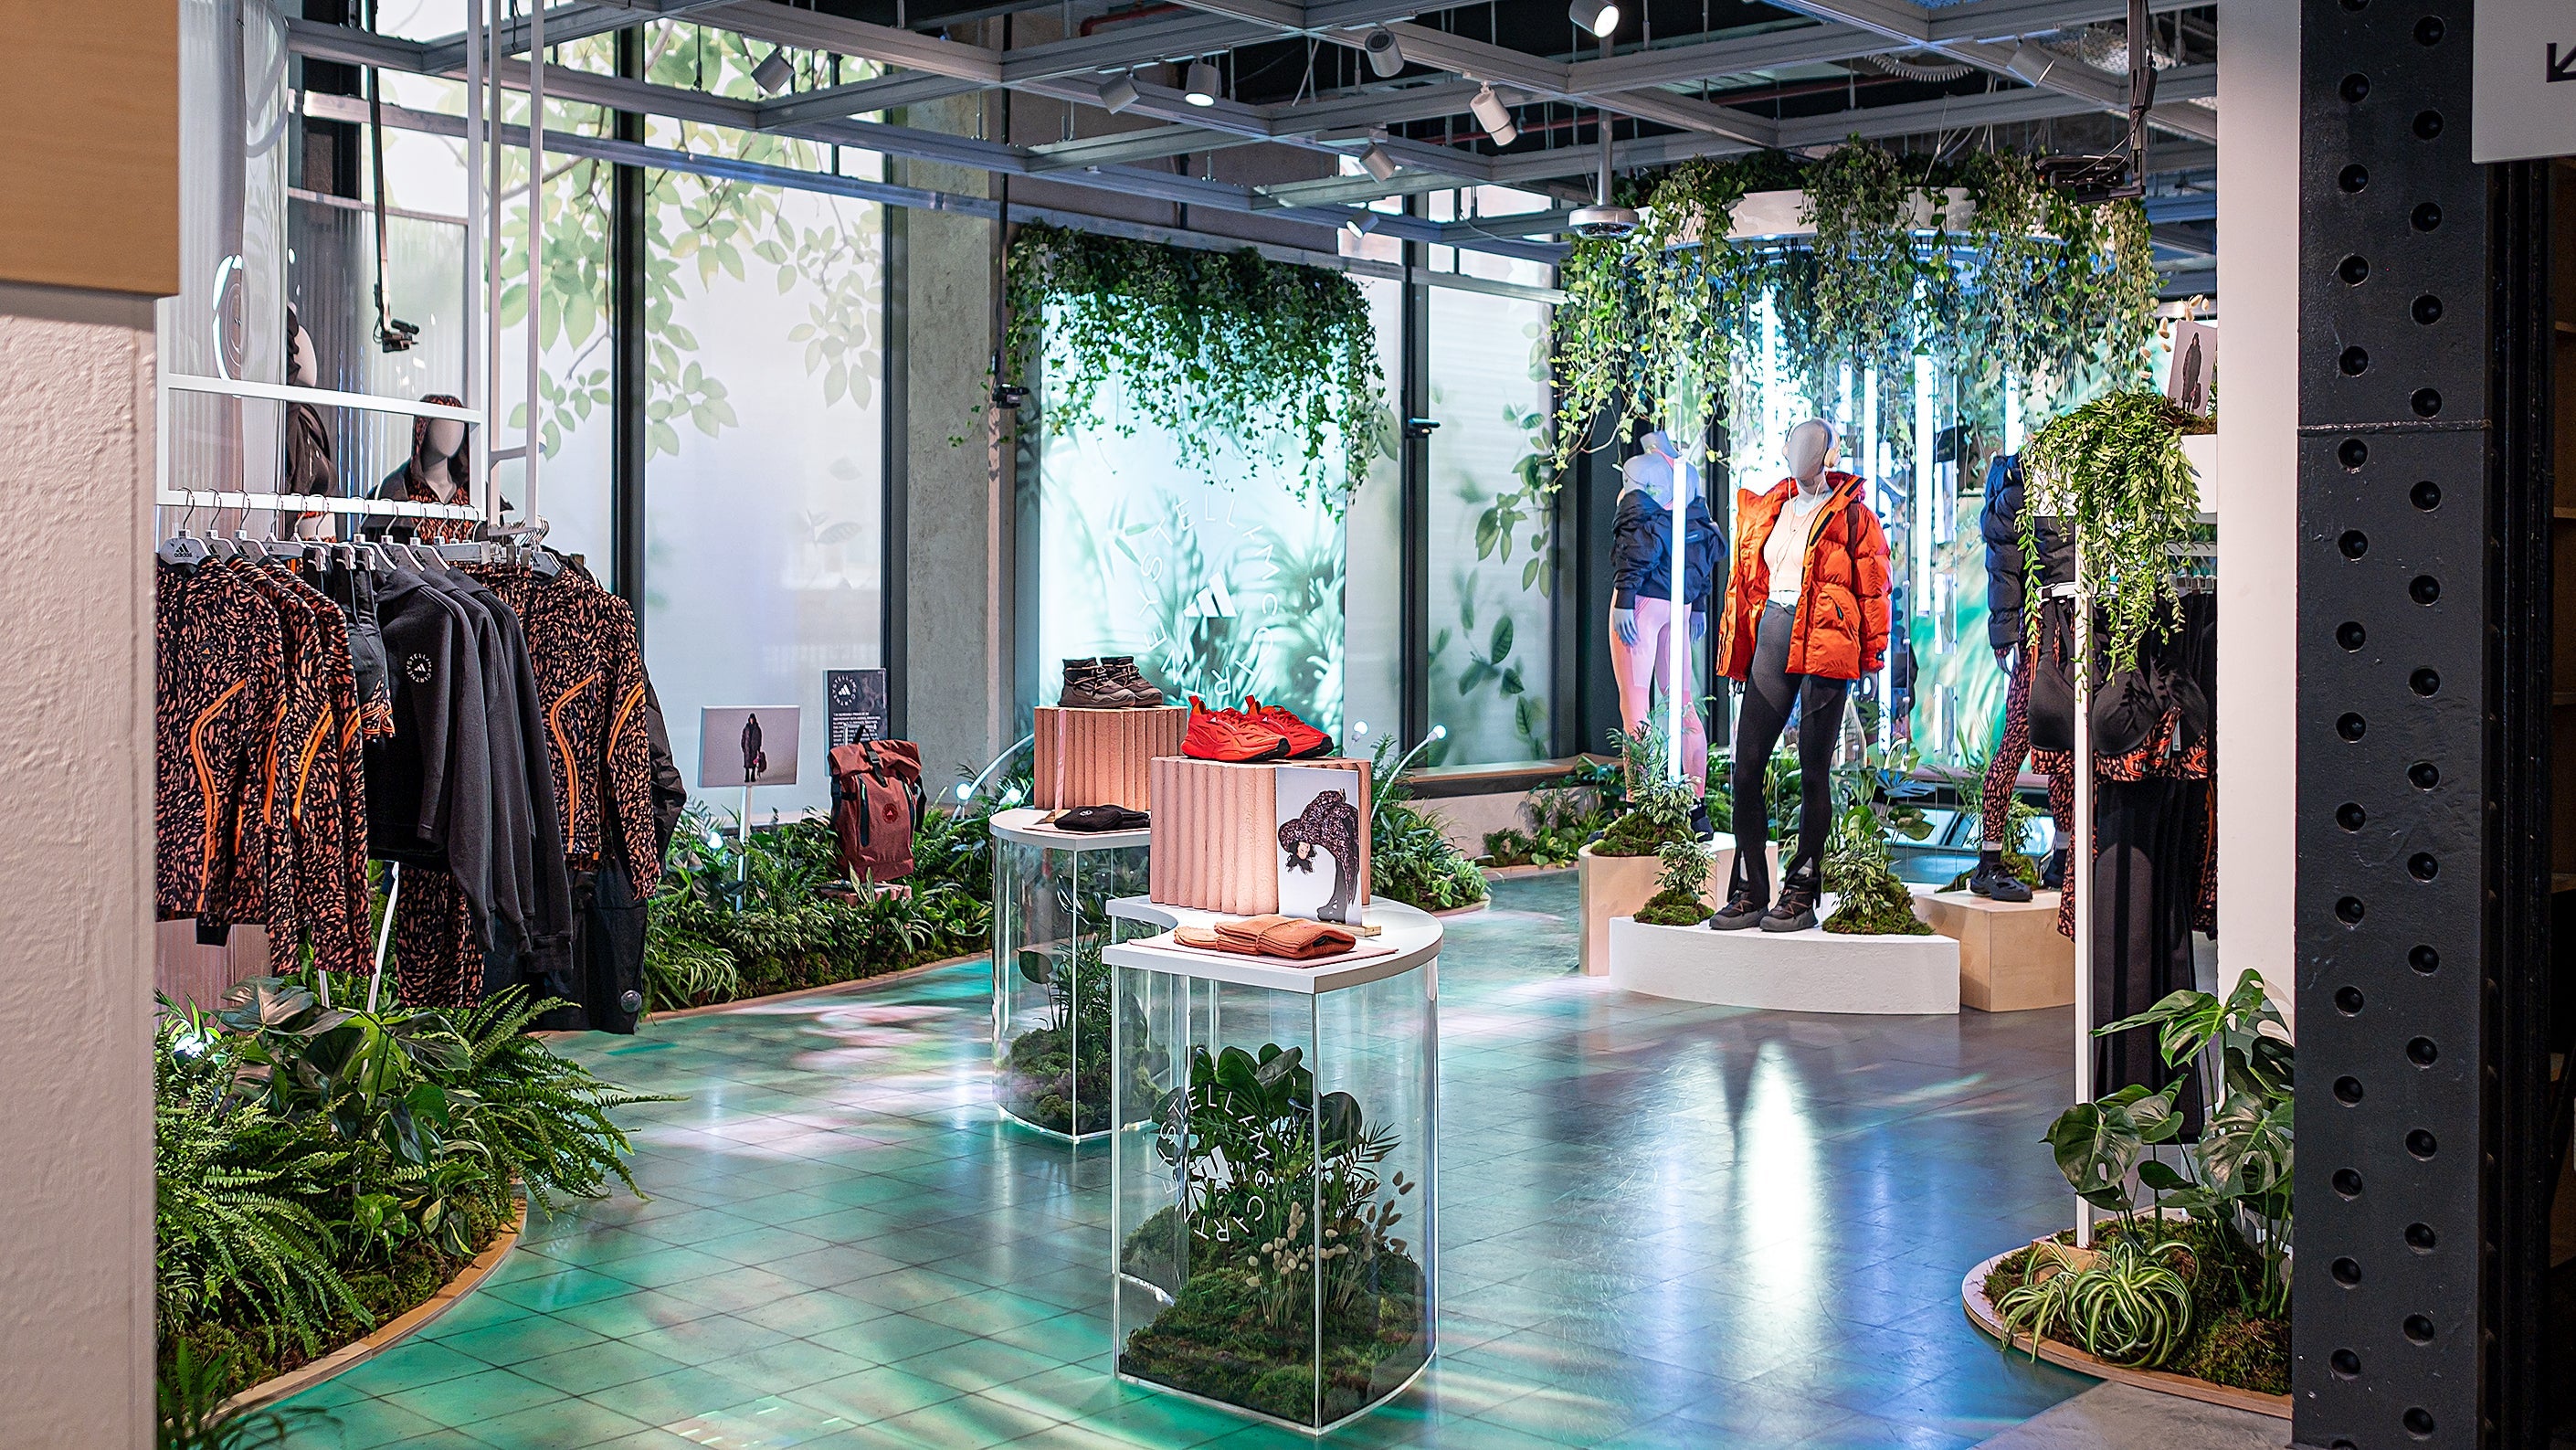 A complete transformation of Adidas' London store with plants for hire creating a beautiful natural landscape. 